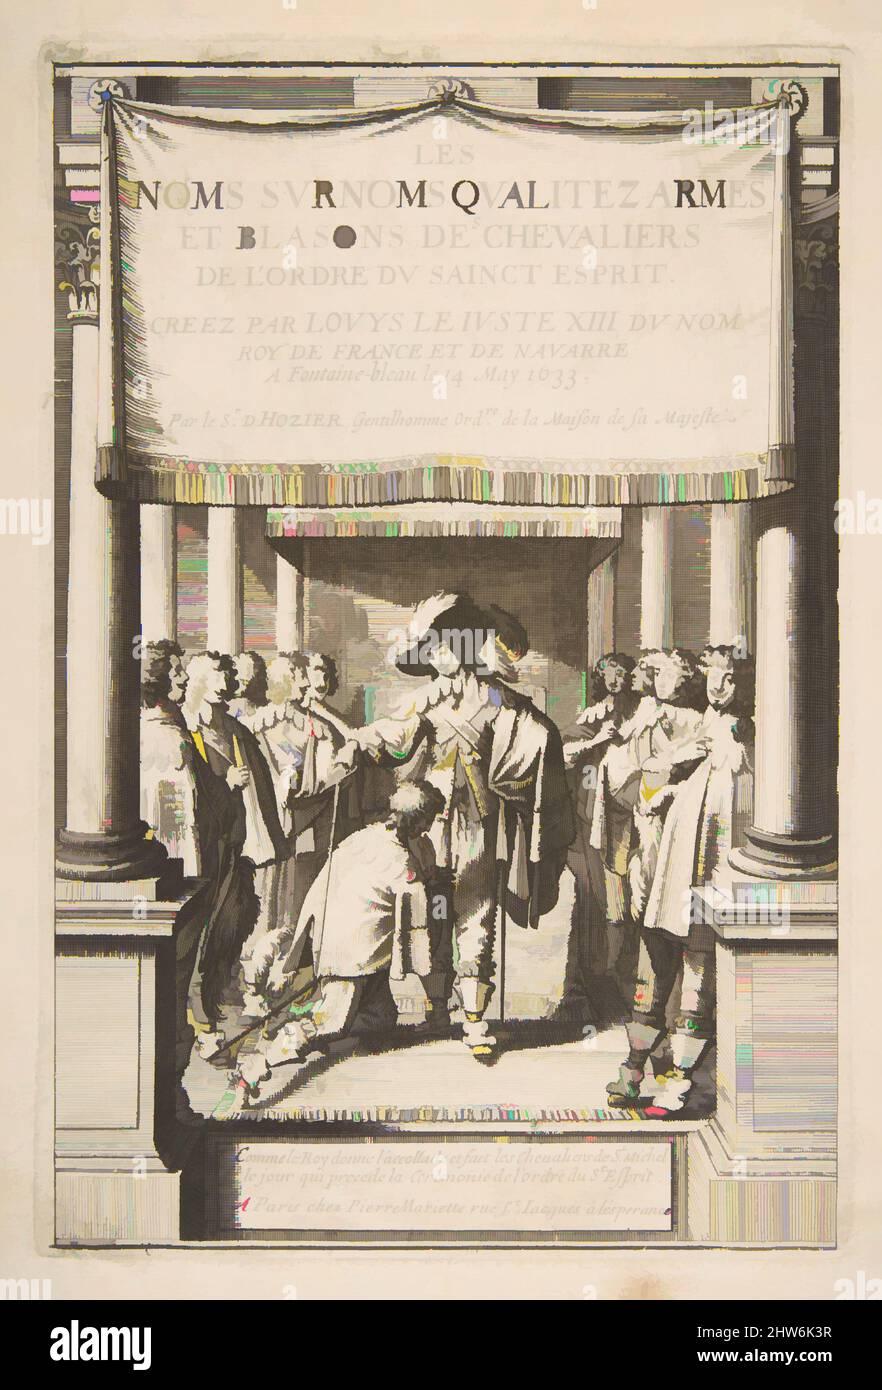 Art inspired by Frontispiece to Pierre d'Hozier's 'Les noms surnoms qualitez armes et blasons des chevaliers de l'Ordre du Sainct Esprit' with Louis XIII dubbing a nobleman kneeling before him, in the presence of several other noblemen, 1634, Etching, Sheet: 10 1/2 × 7 3/16 in. (26.6, Classic works modernized by Artotop with a splash of modernity. Shapes, color and value, eye-catching visual impact on art. Emotions through freedom of artworks in a contemporary way. A timeless message pursuing a wildly creative new direction. Artists turning to the digital medium and creating the Artotop NFT Stock Photo